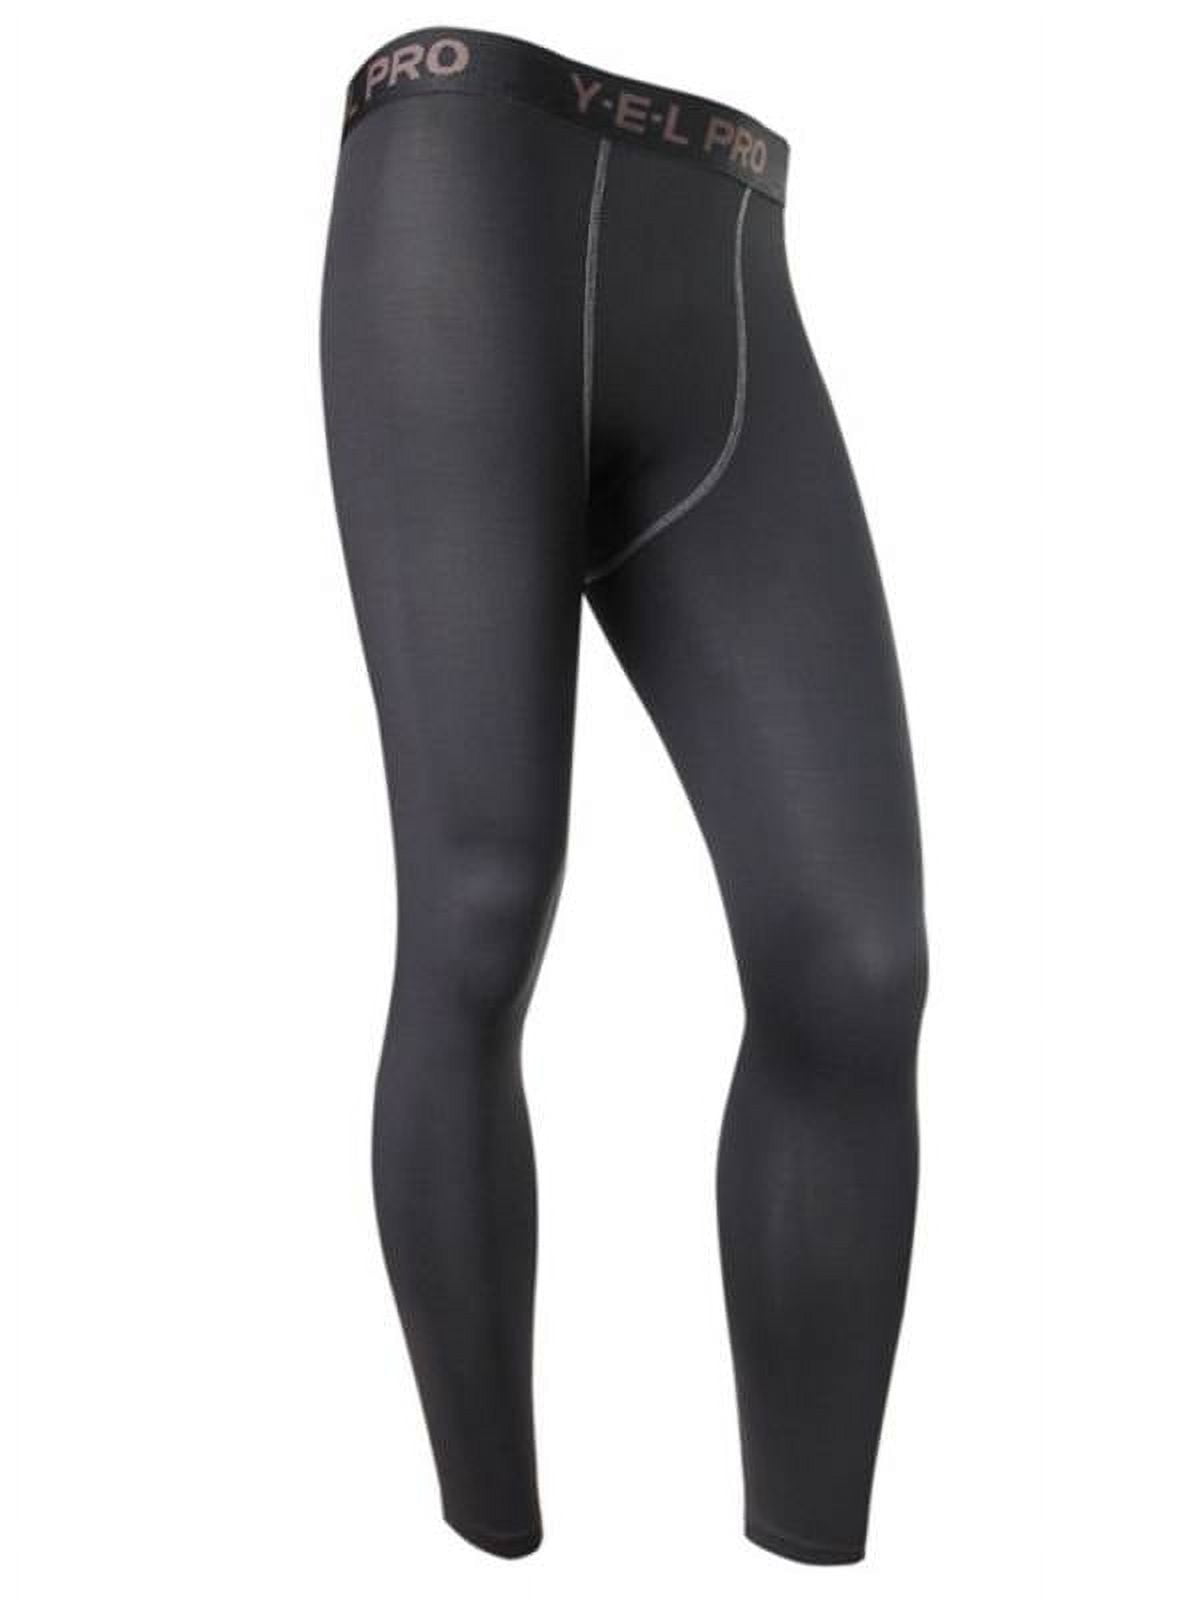 Zensah Recovery Capris - 3/4 Compression Tights for Running, Working Out,  Basketball